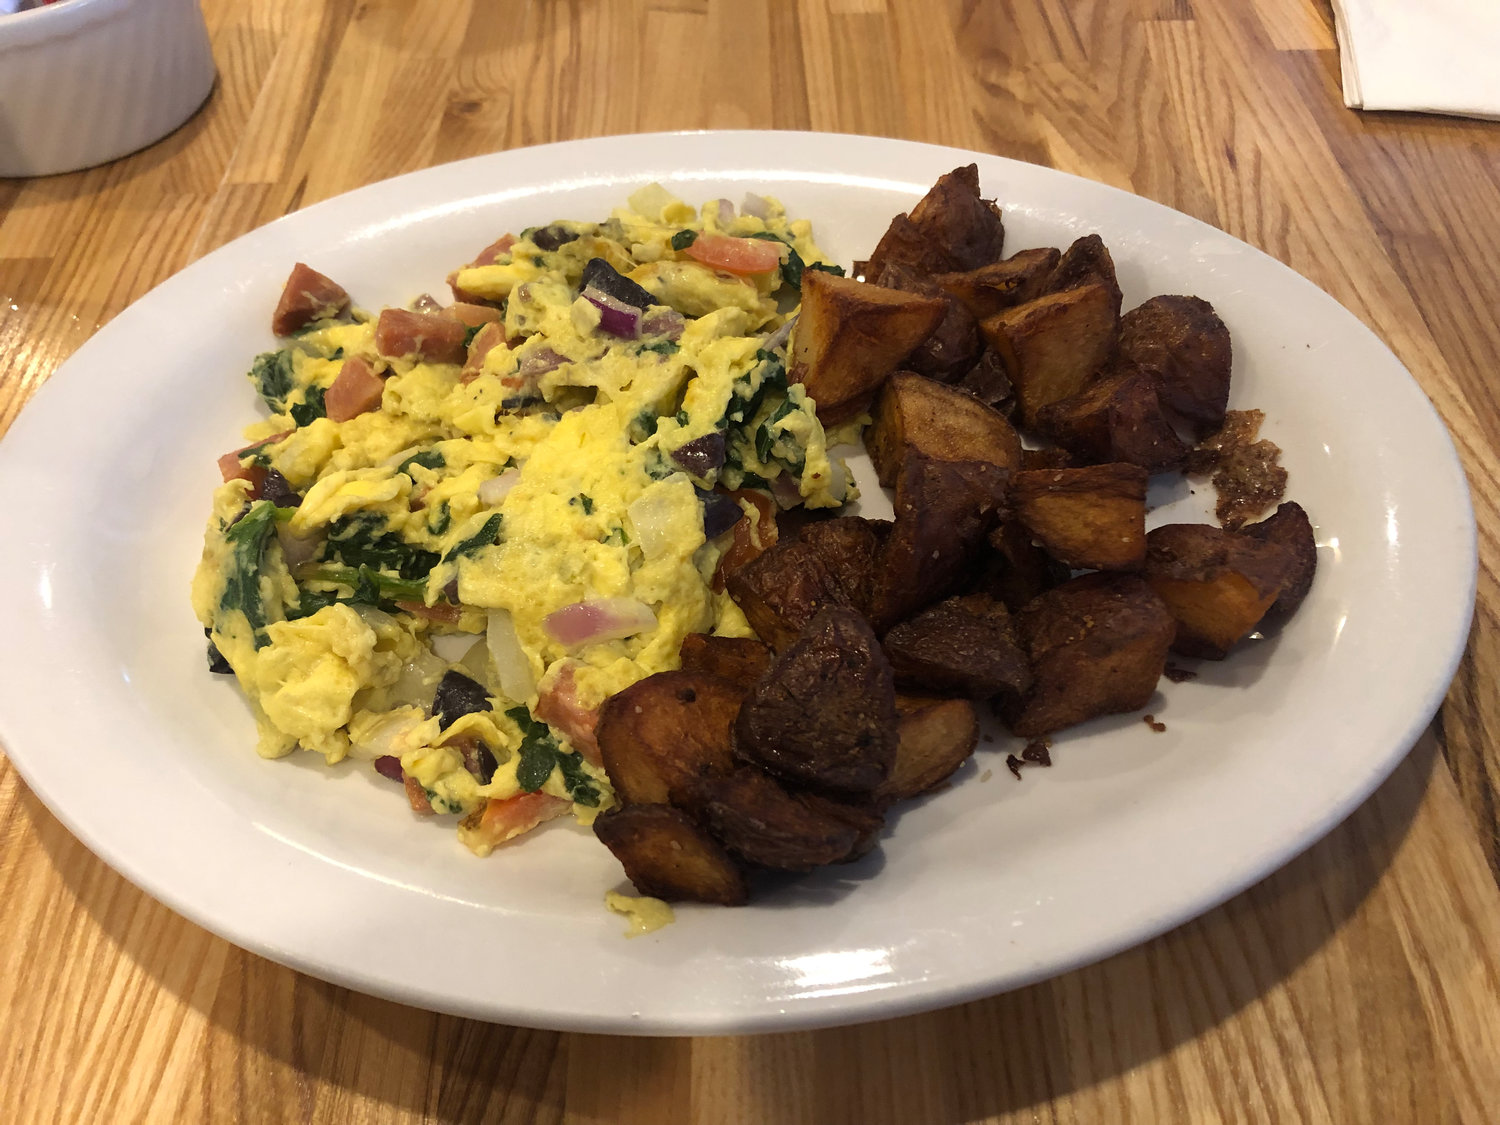 The meat-lovers omelet, with a side of toast and crispy home fries, is just one of the breakfast classics on the menu at Crosswinds at the airport.